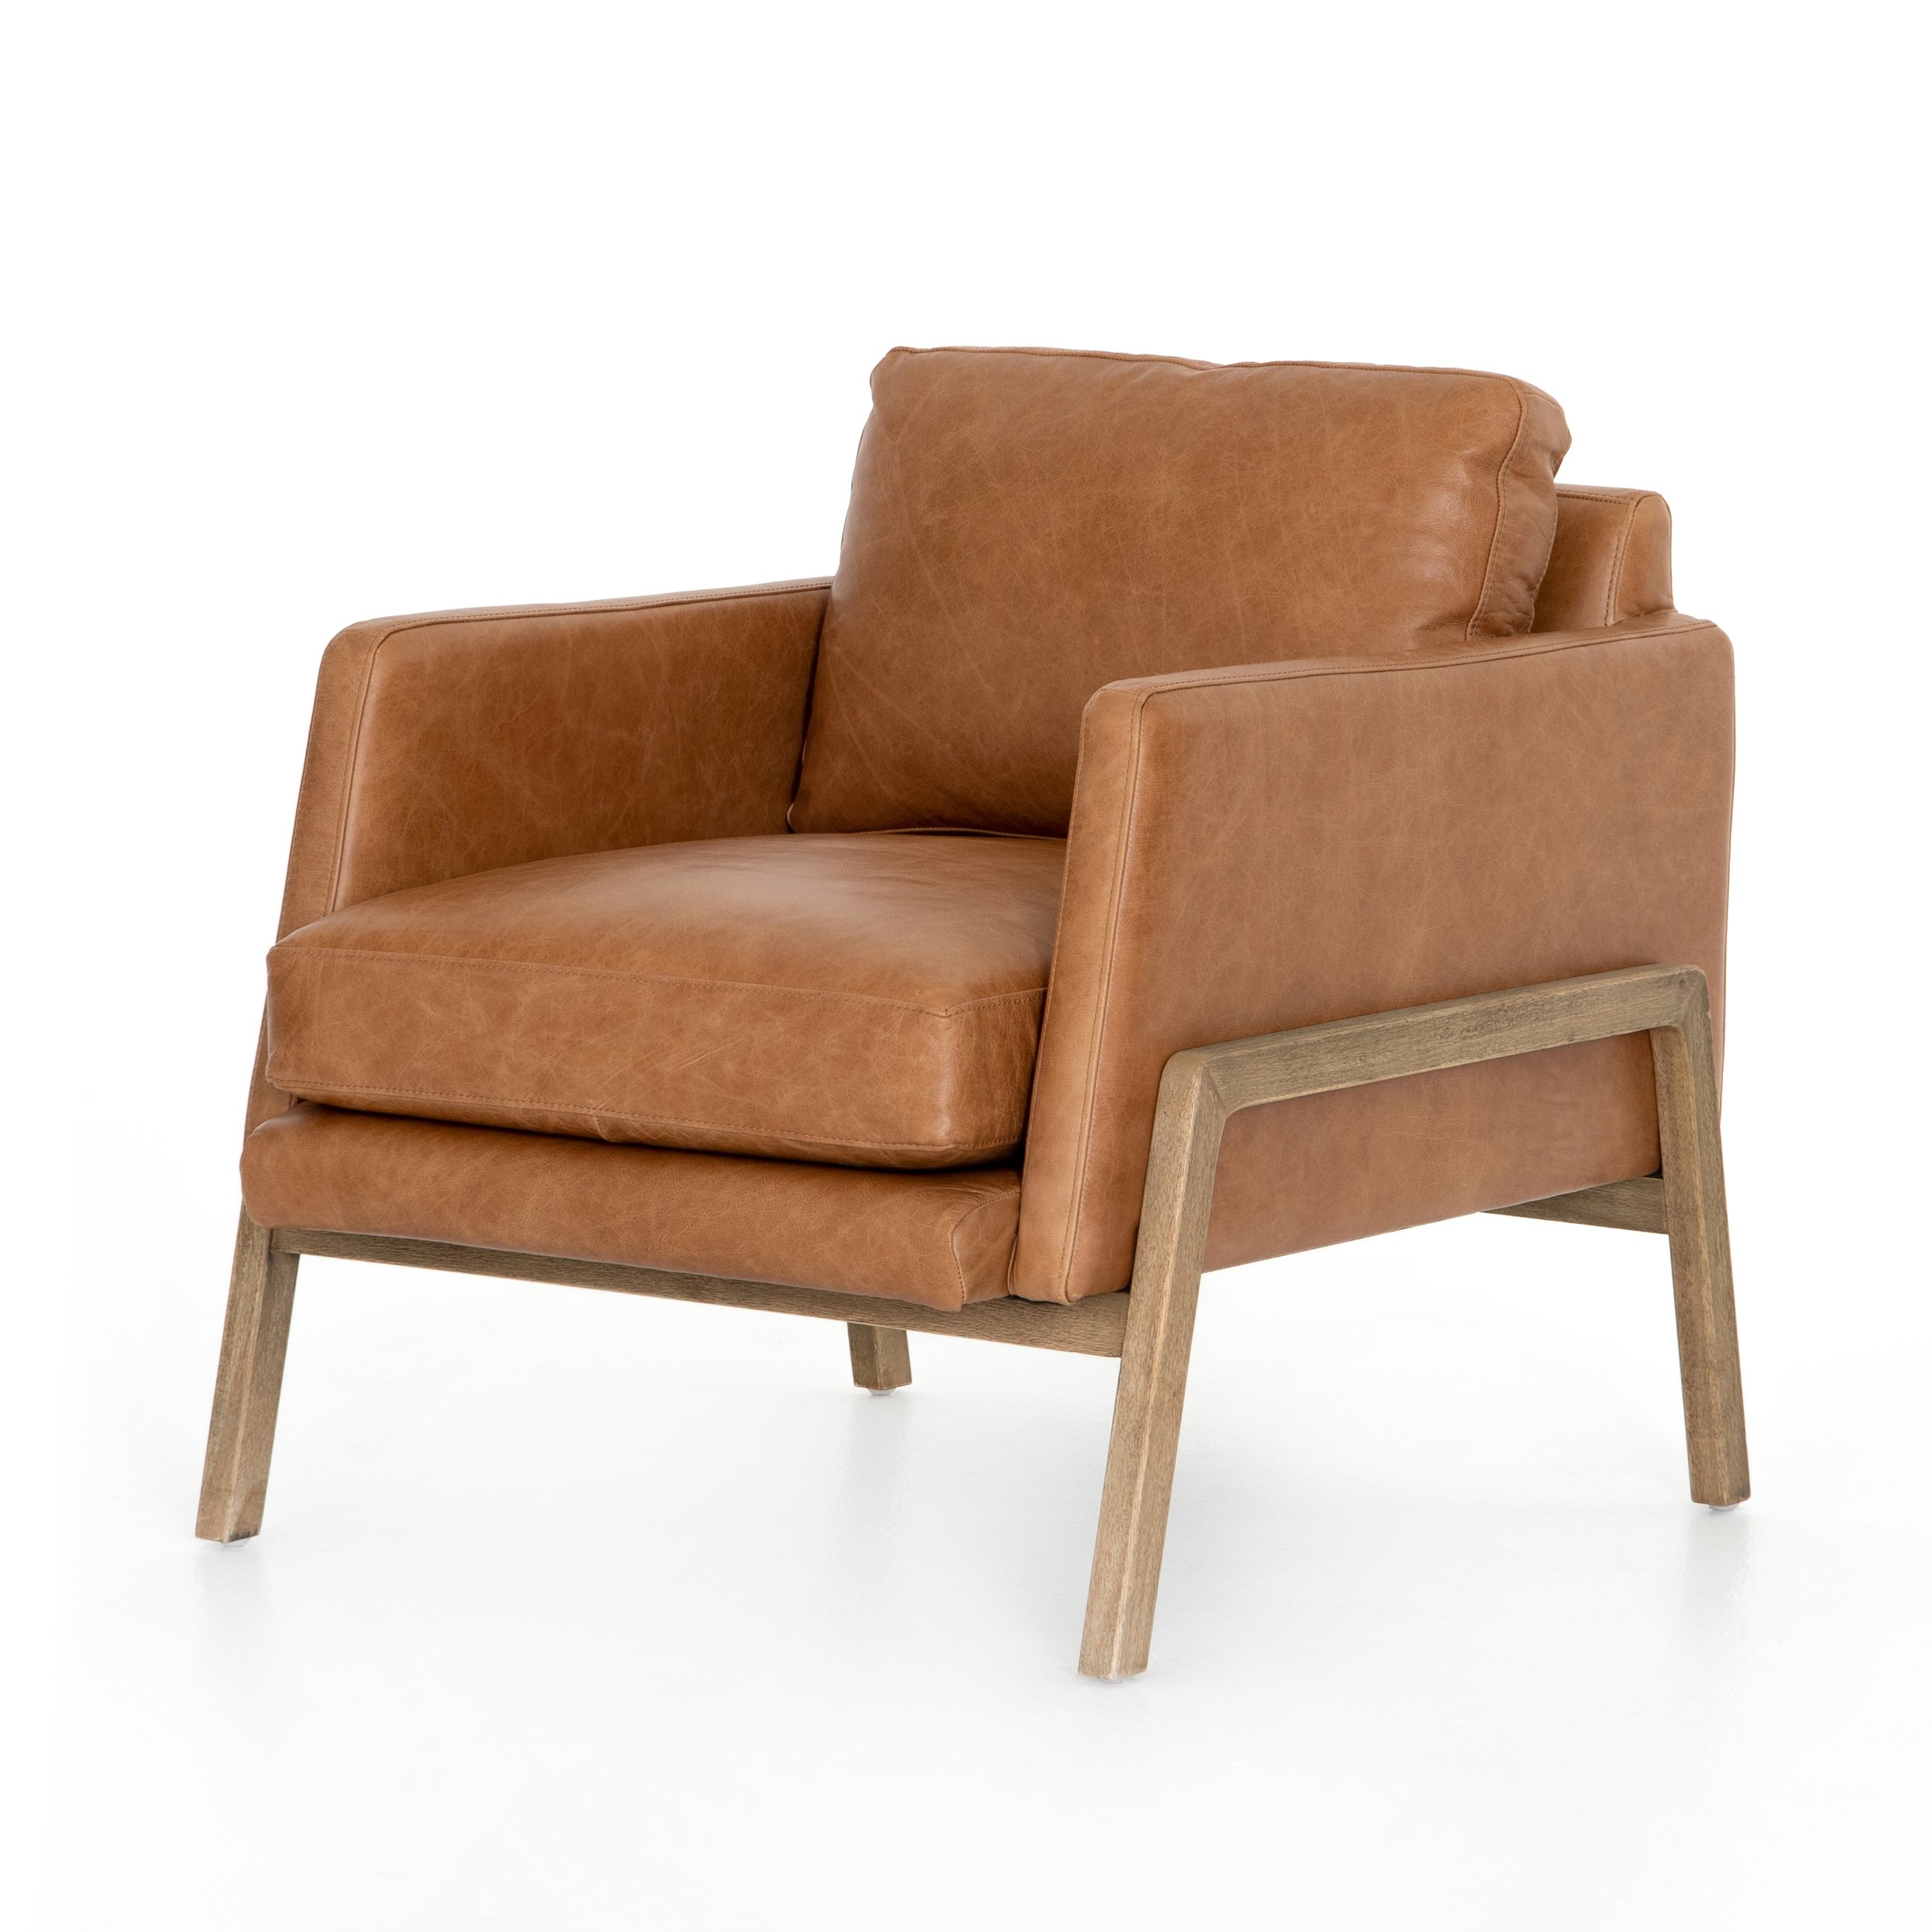 modern saddle leather arm chair with wooden show-frame base and legs